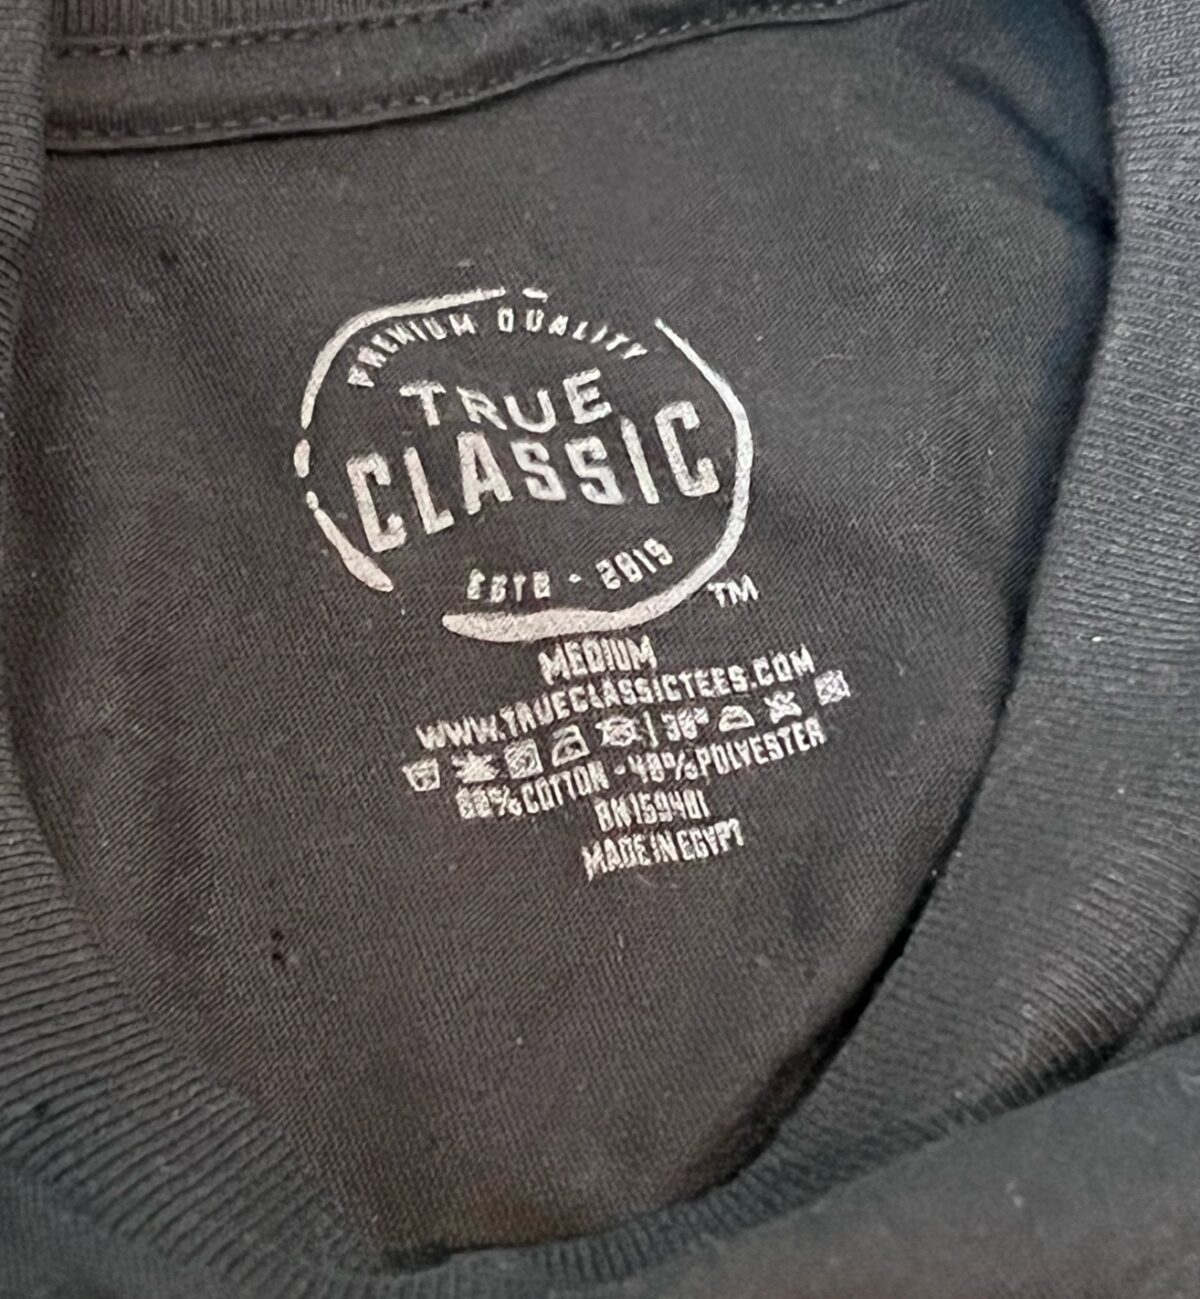 True Classic Tees Review - We've Tried 23+ Styles